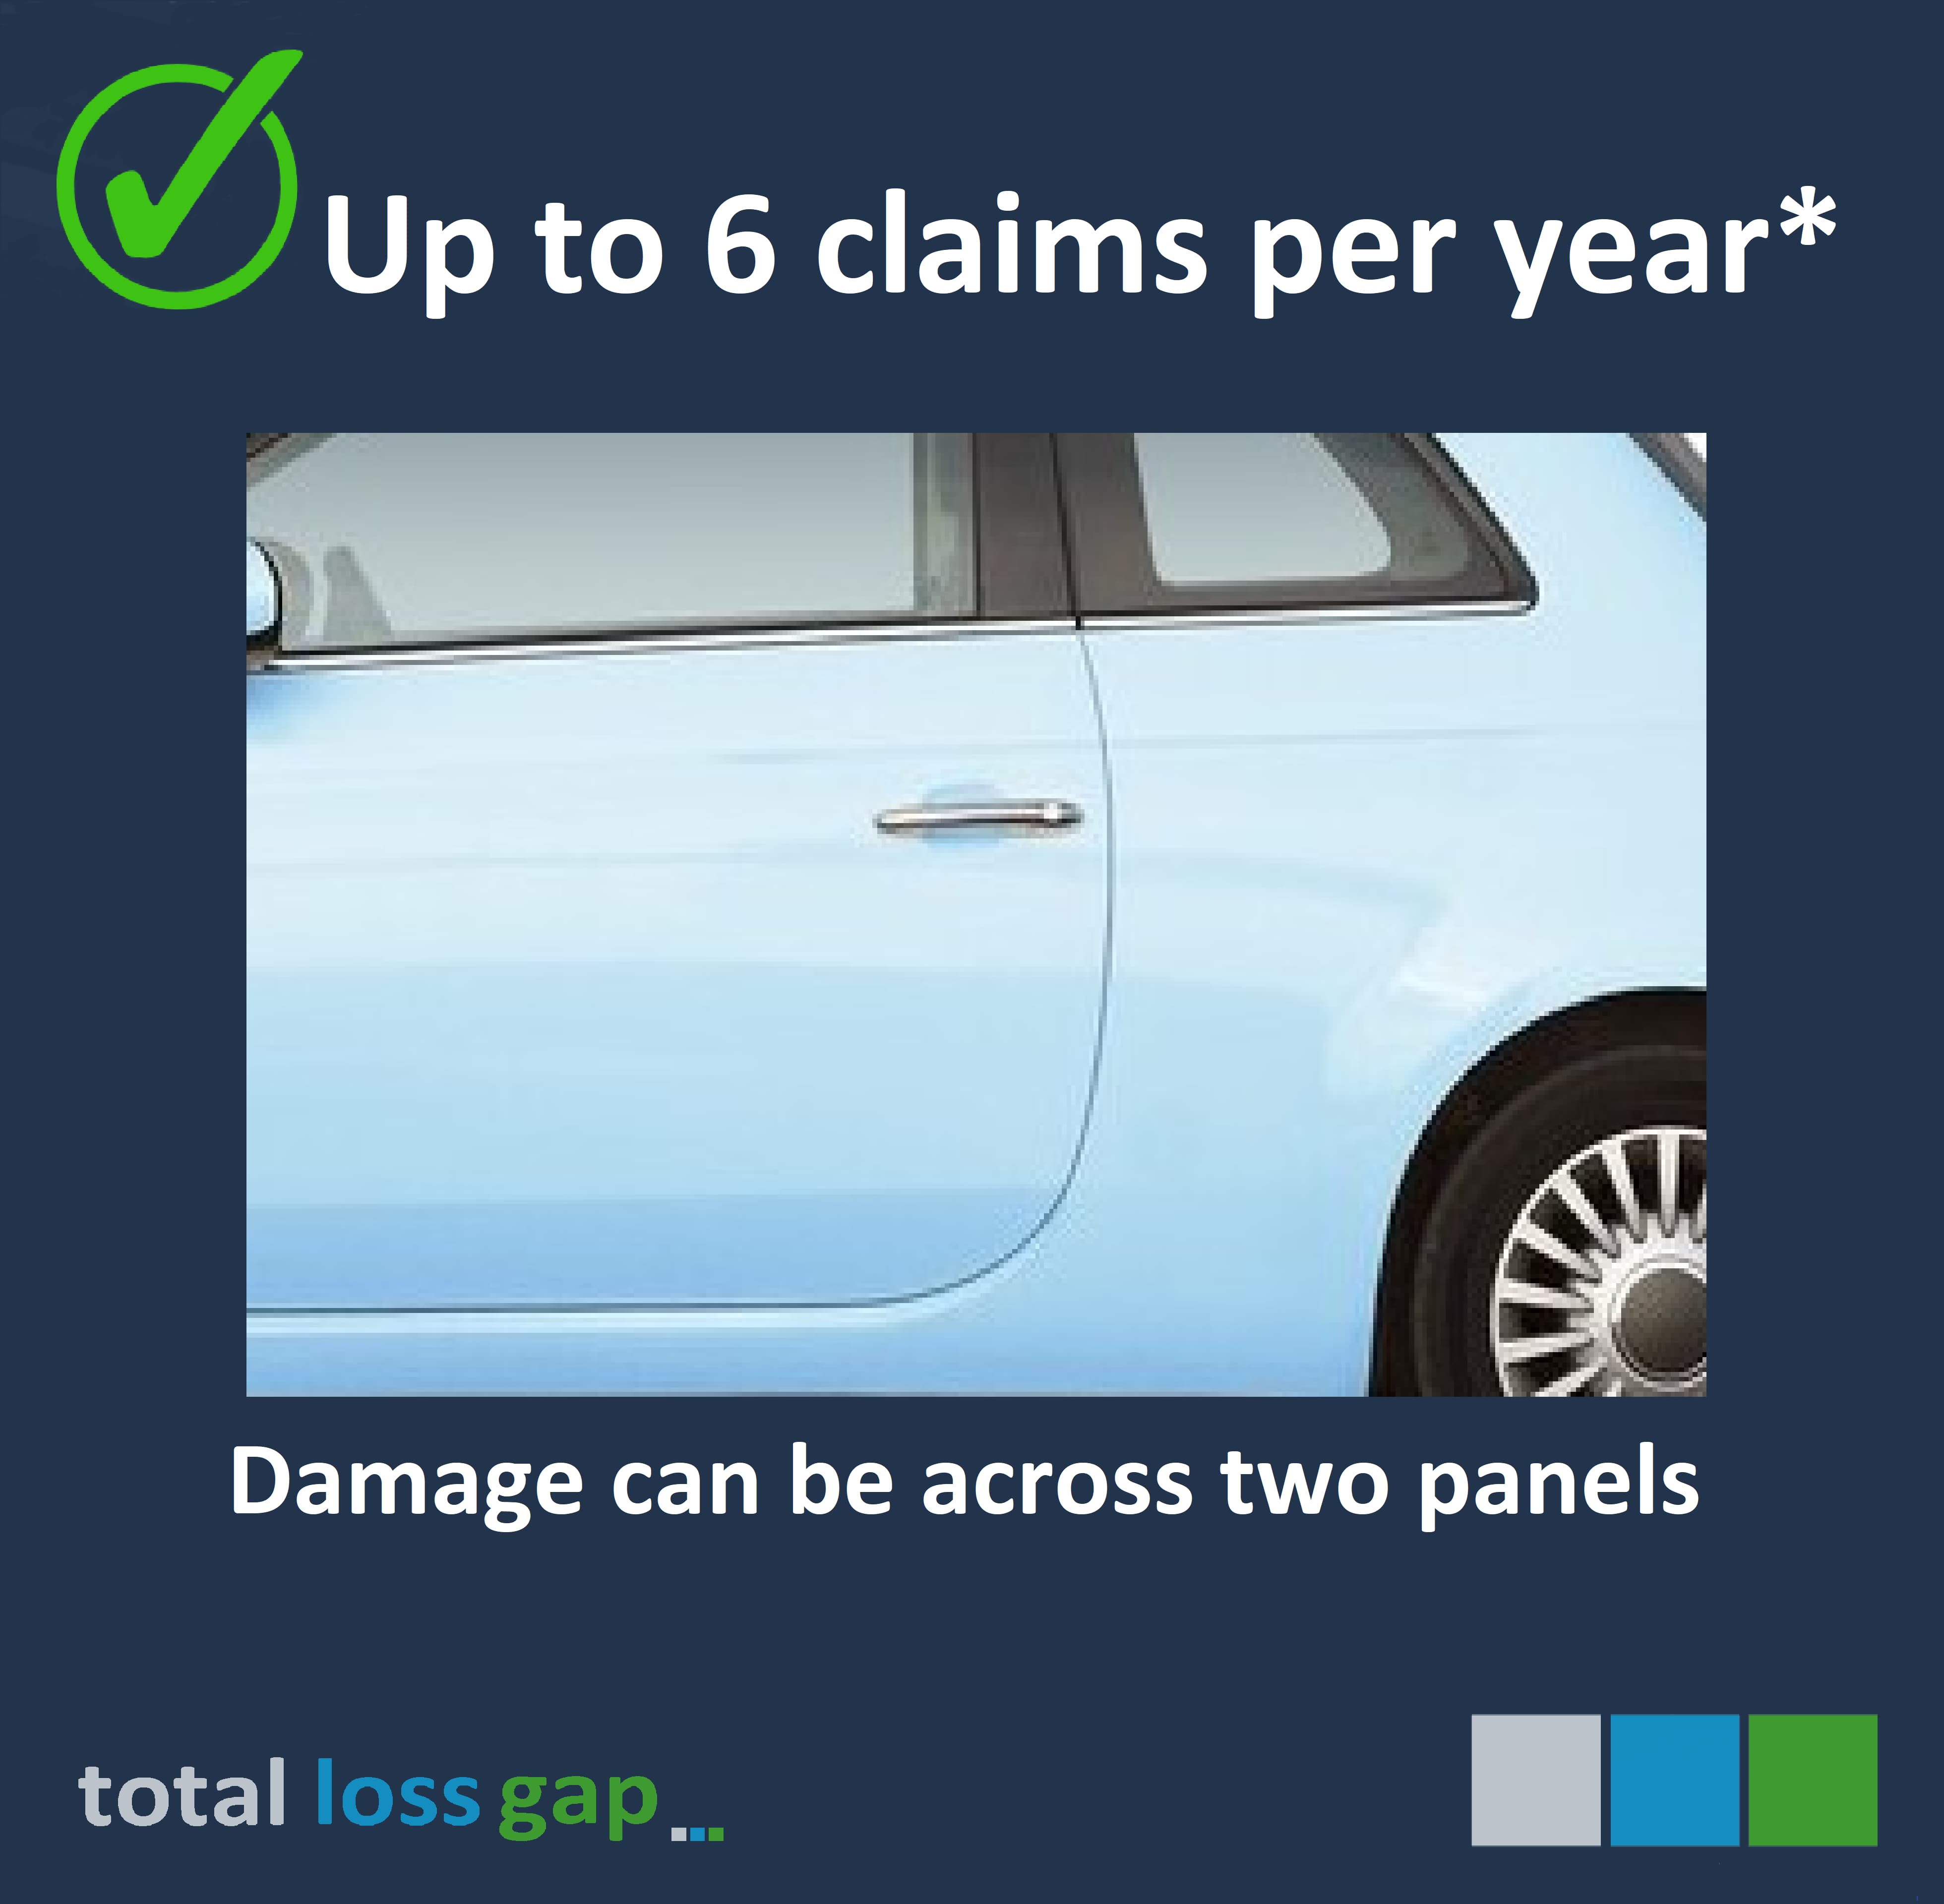 Your Smart Care policy can cover damage up to 30cm in length